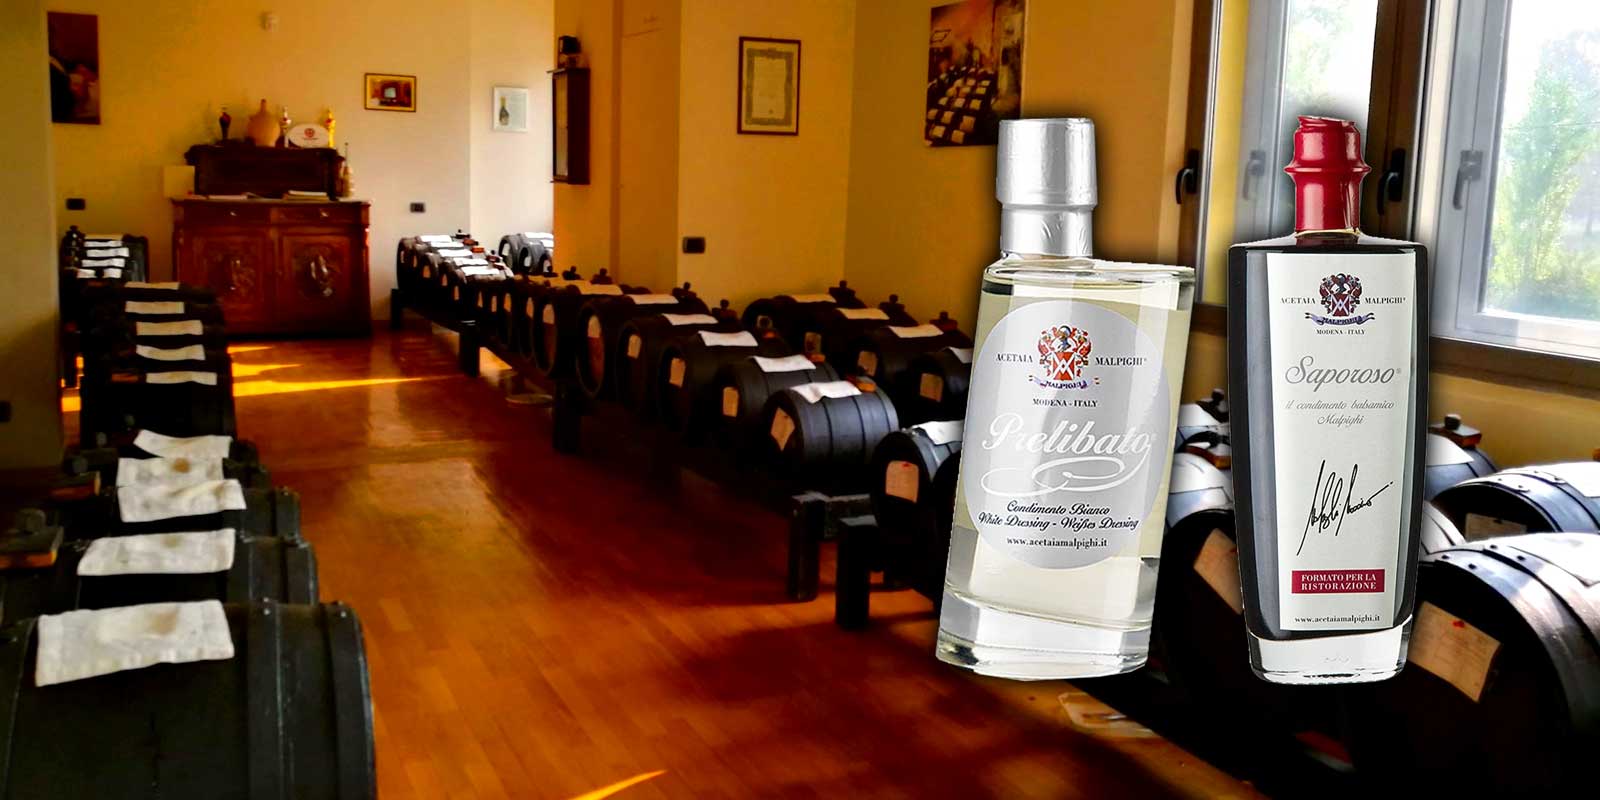 Vinegar - Aceto Balsamico from Malpighi The Malpighi company has been producing high-quality acetos for more than 200 years. You can only expect exceptionally excellent products from the Malpighi company in Modena, Italy.